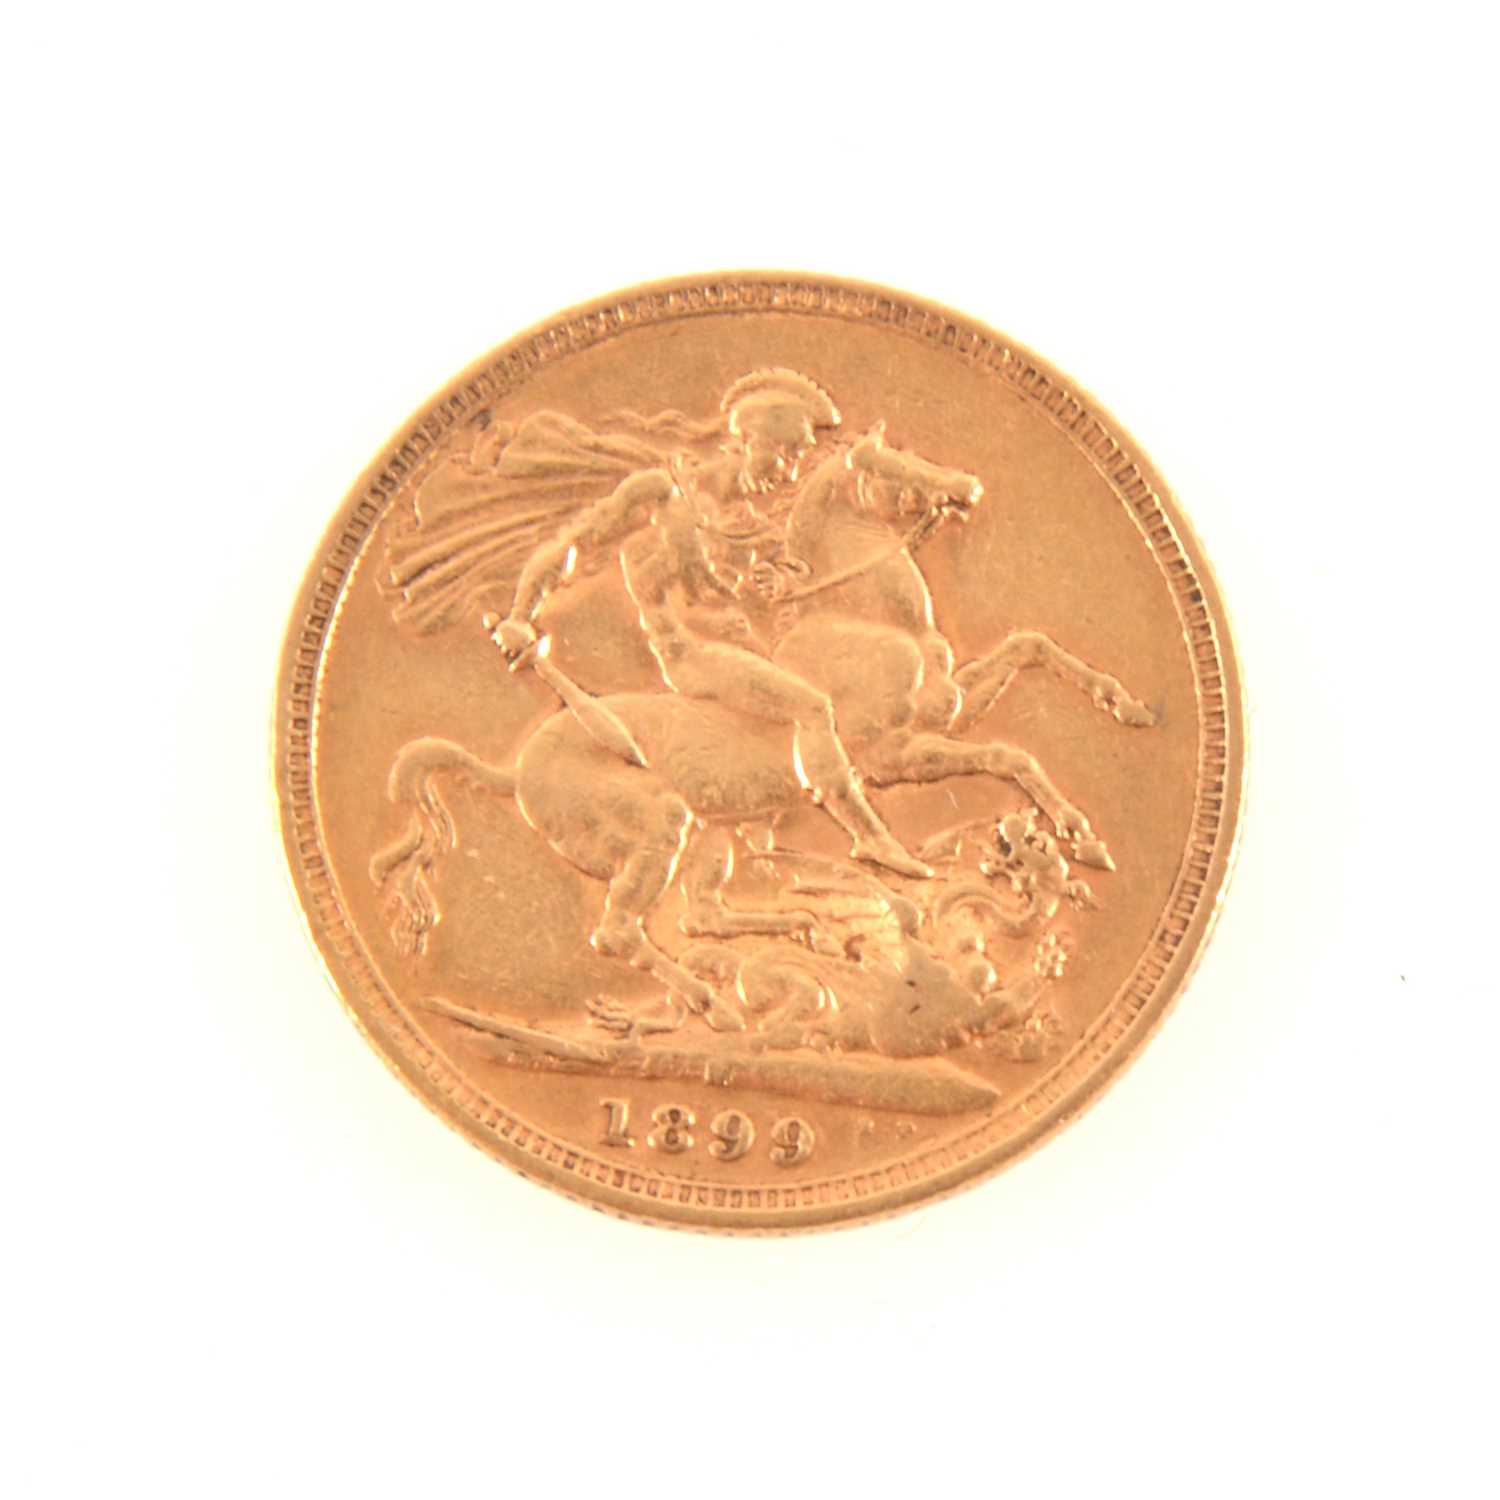 Lot 246 - A Gold Full Sovereign, Victoria Veiled Head, 1899, Melbourne Mint.